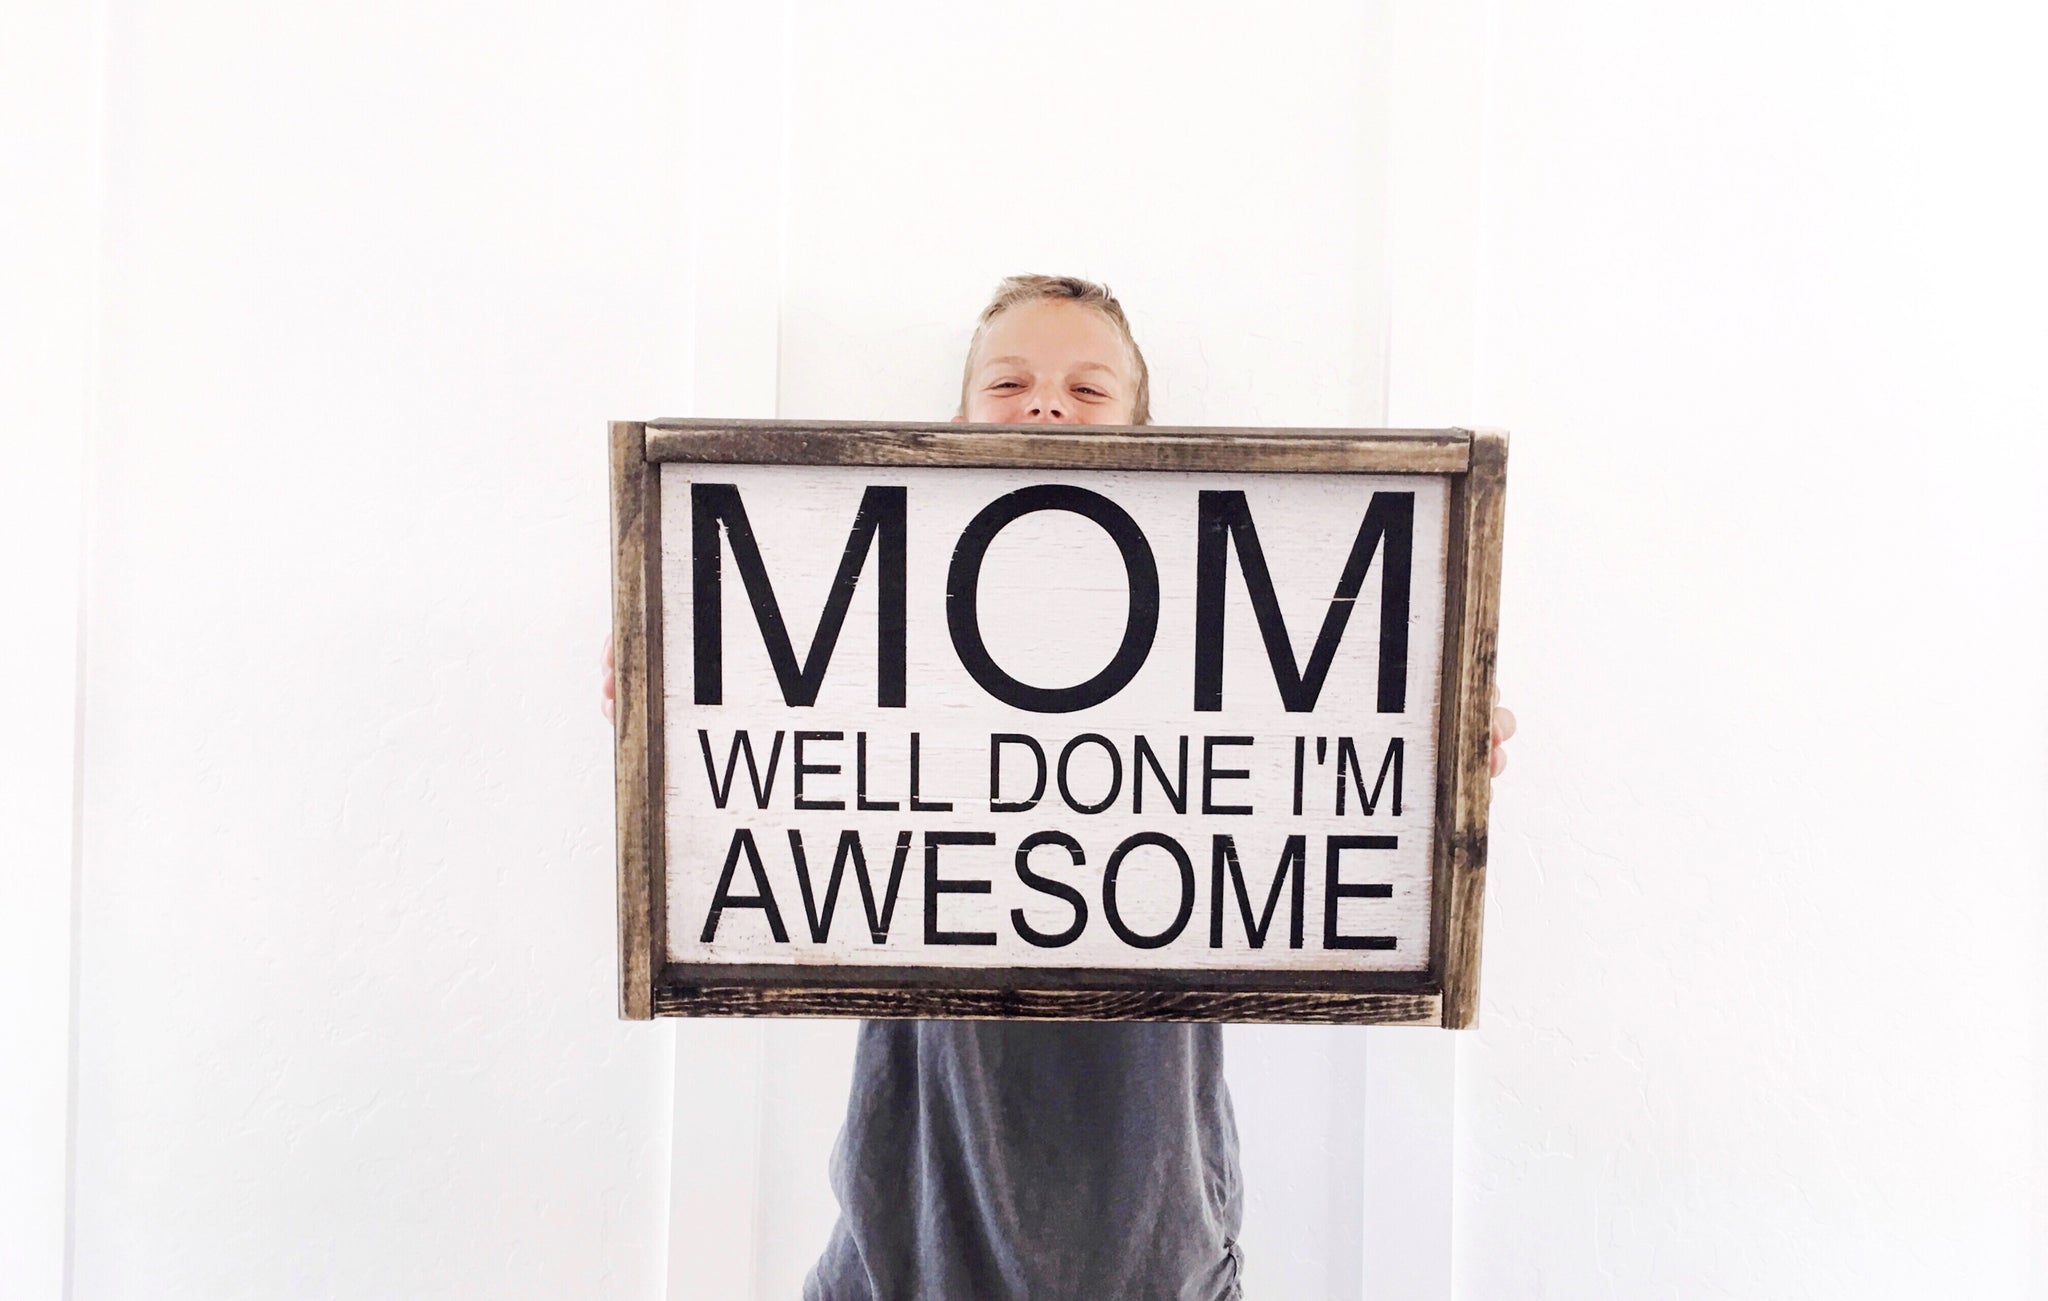 Mom Well Done I M Awesome Jaxnblvd